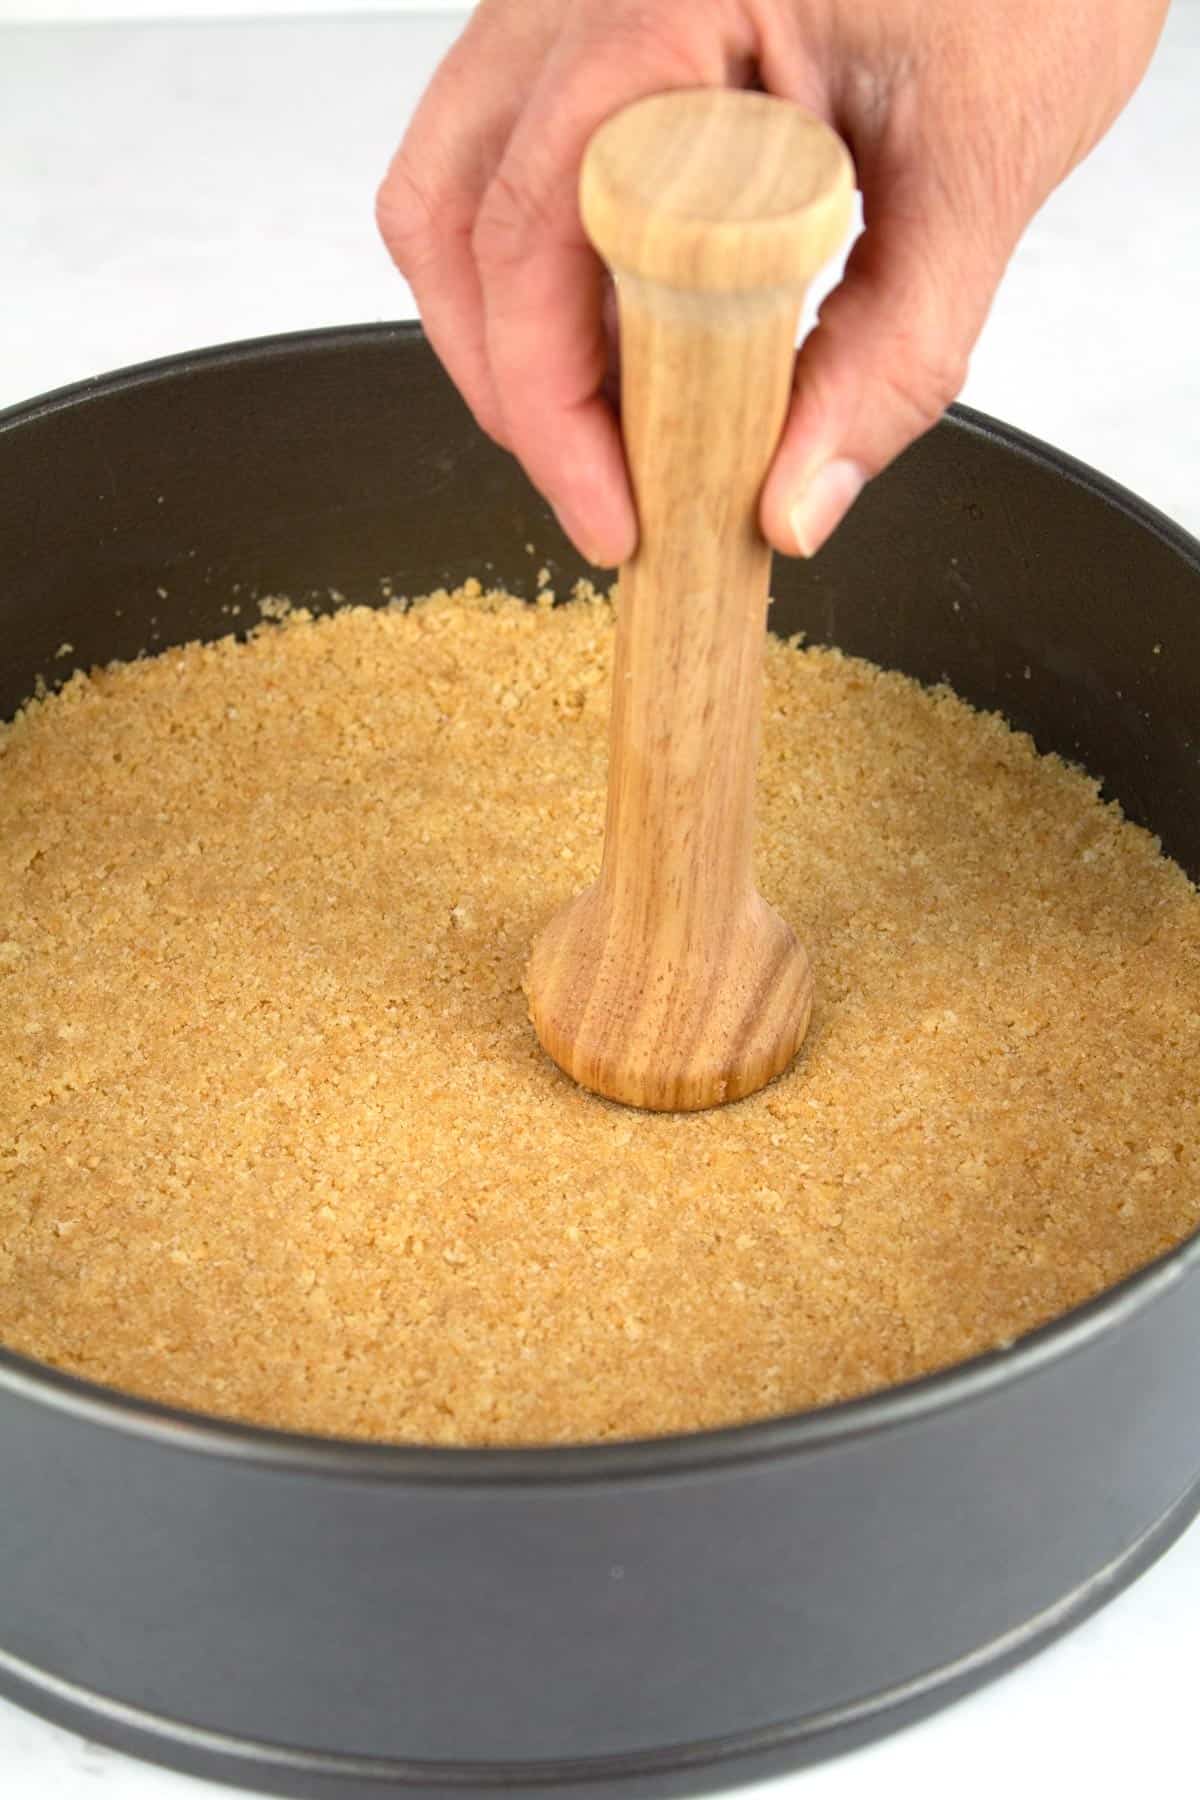 A hand using a tamper to press the crust into a springform pan.